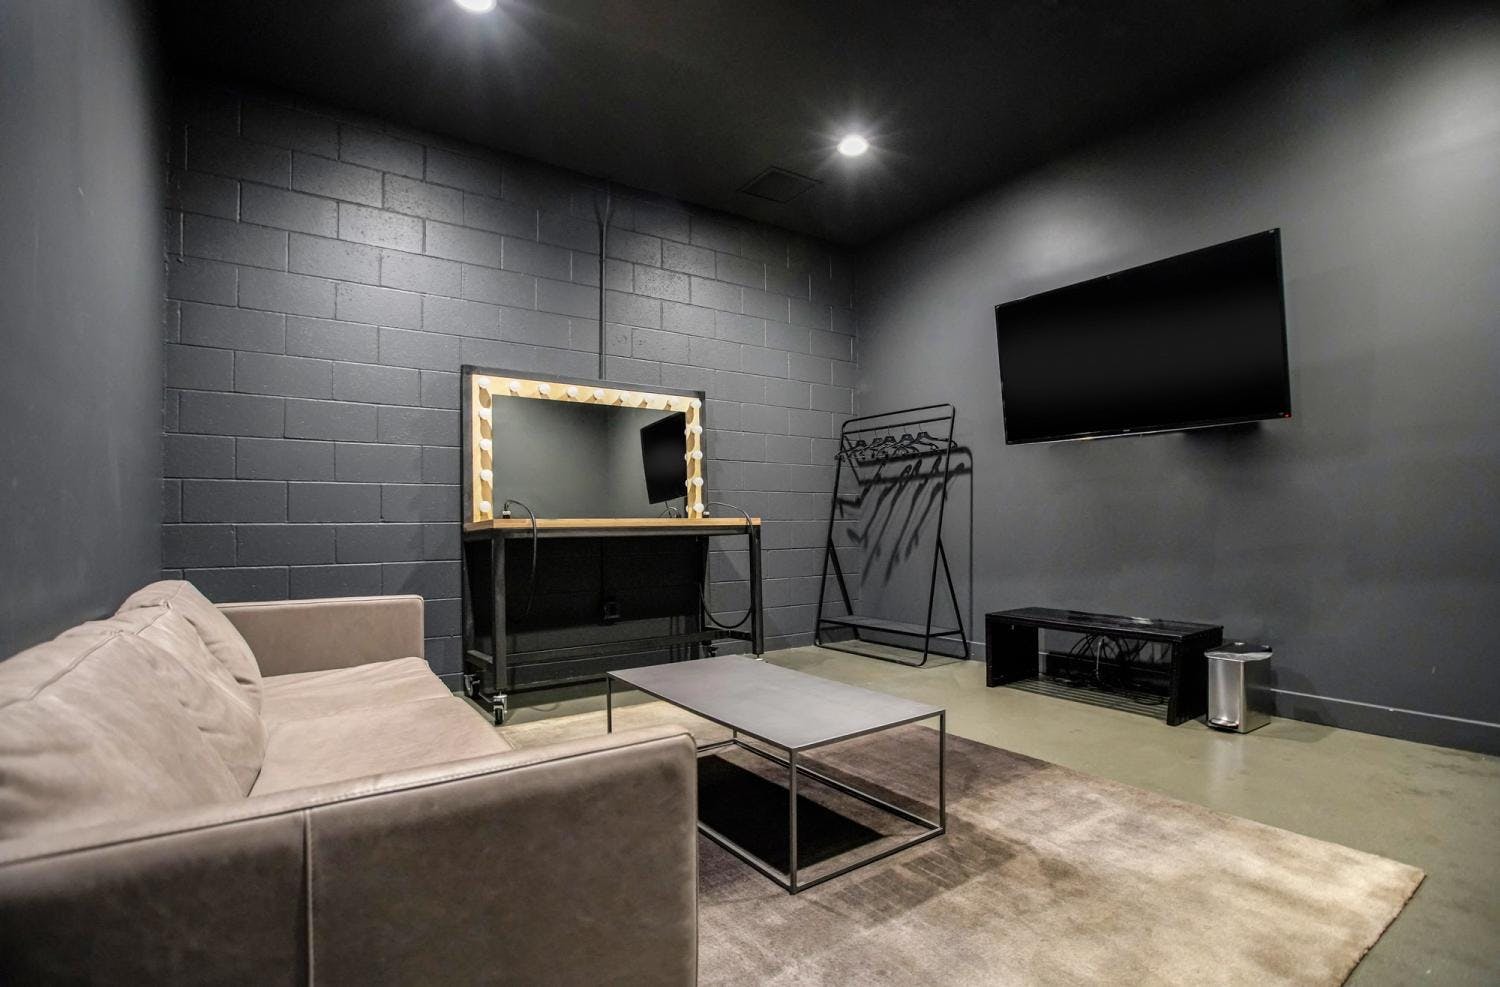 A dressing room with a beige couch, grey coffee table, makeup desk with illuminated mirror, and a TV.